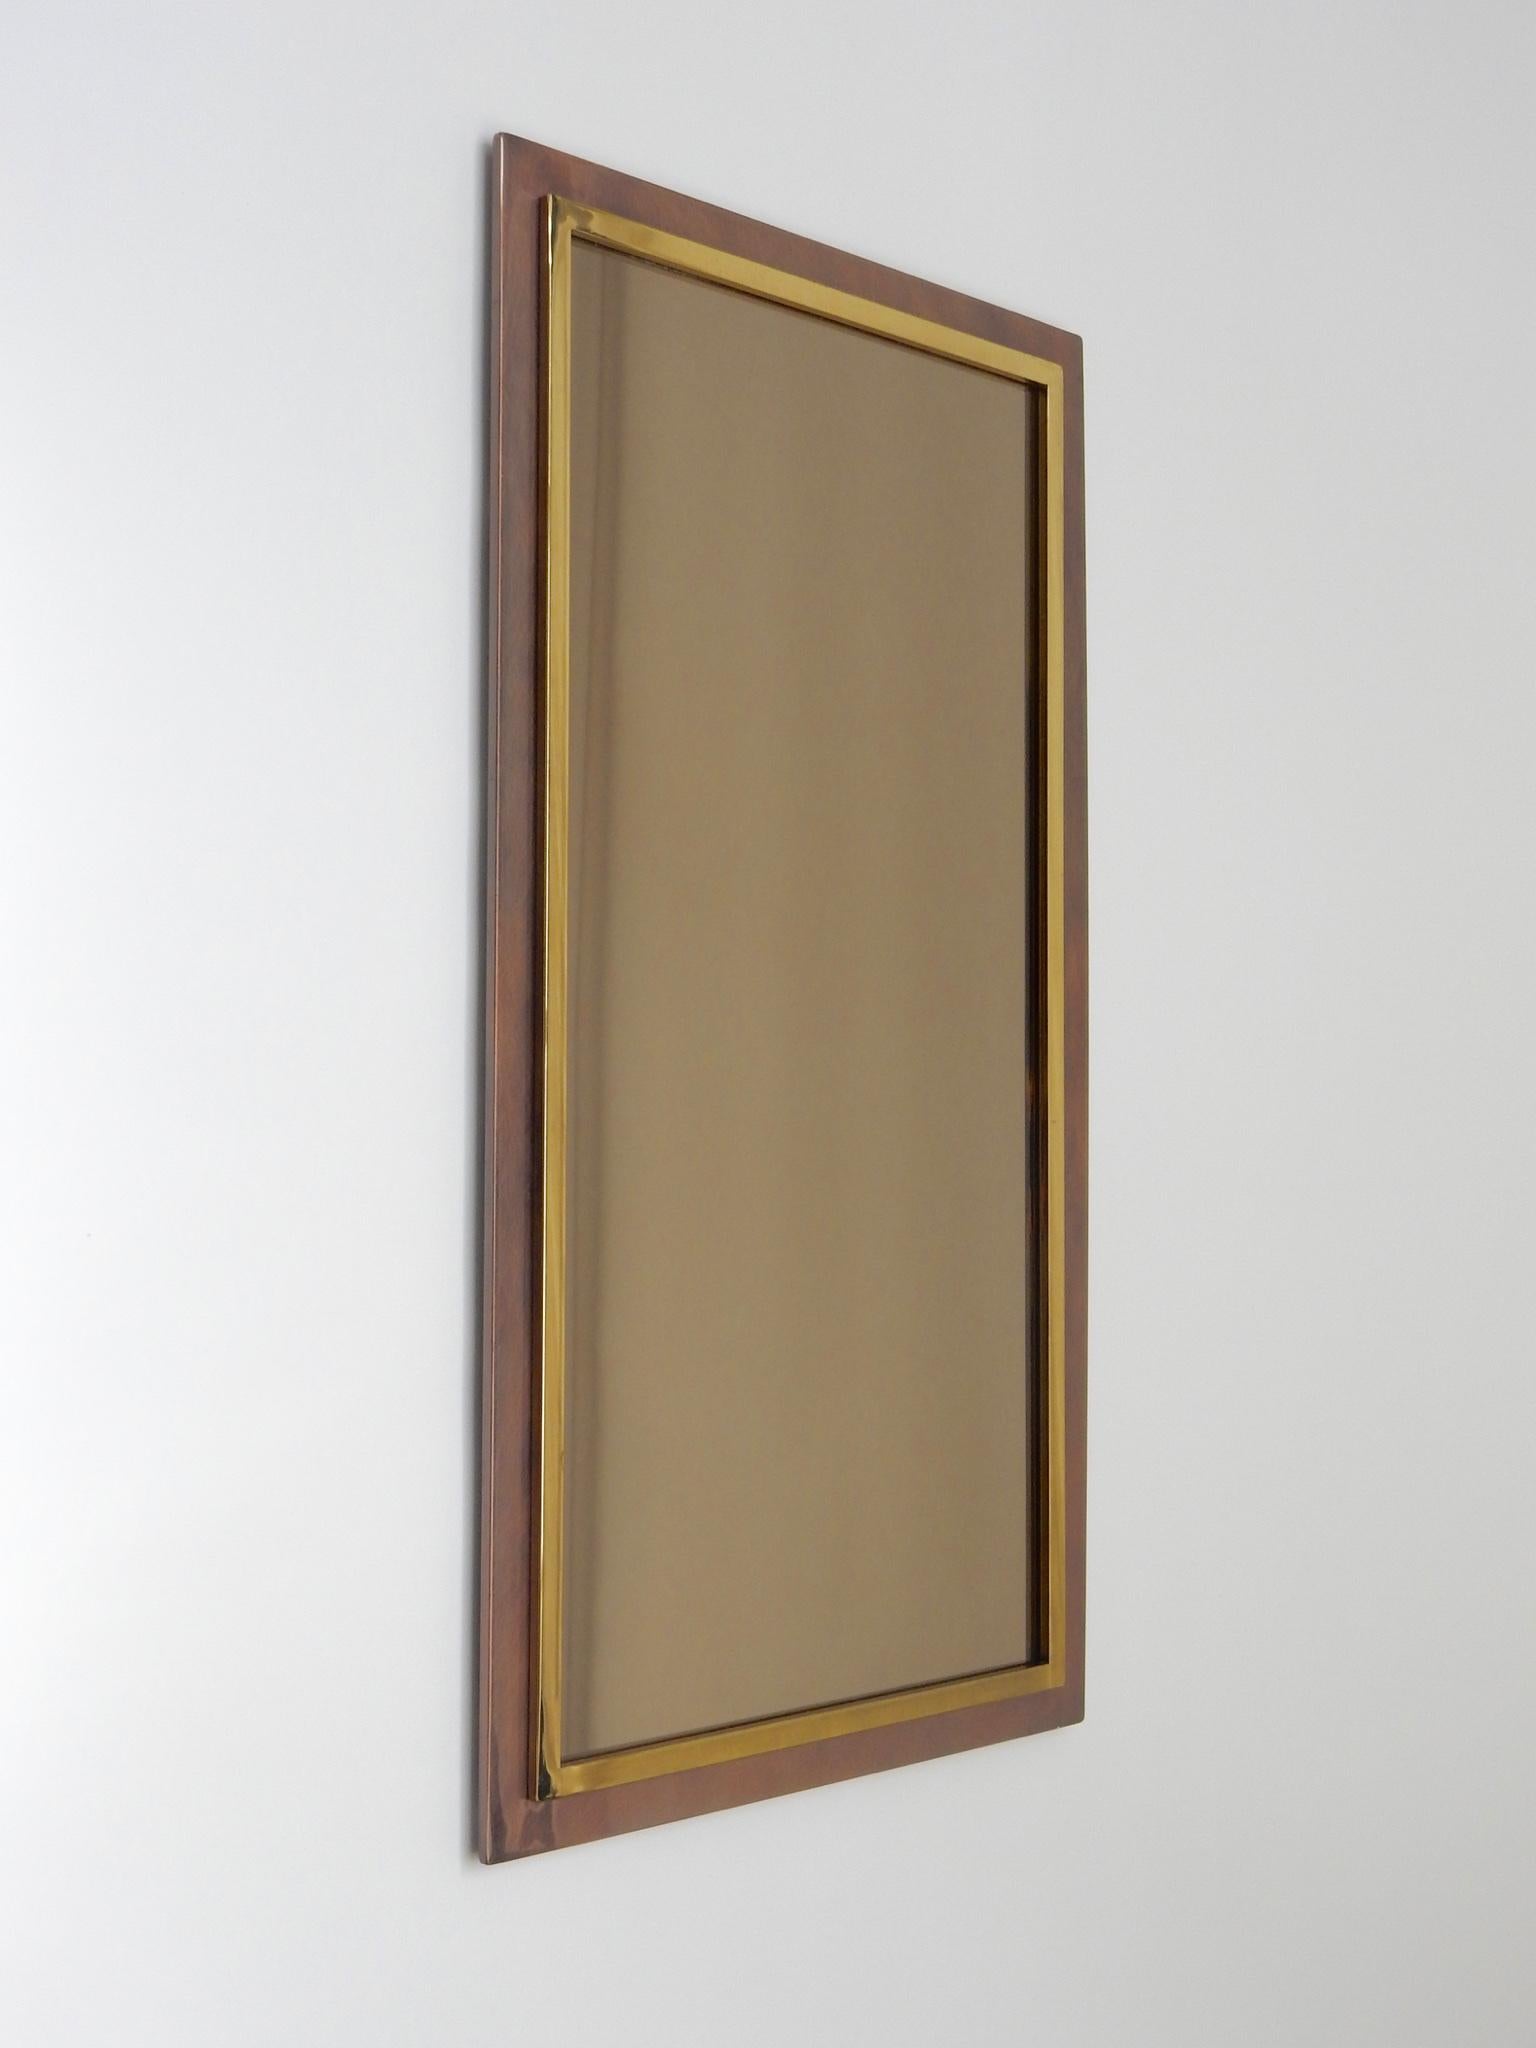 Belgo Chrome smoked mirror with brass and rose brass finish, 1970s.